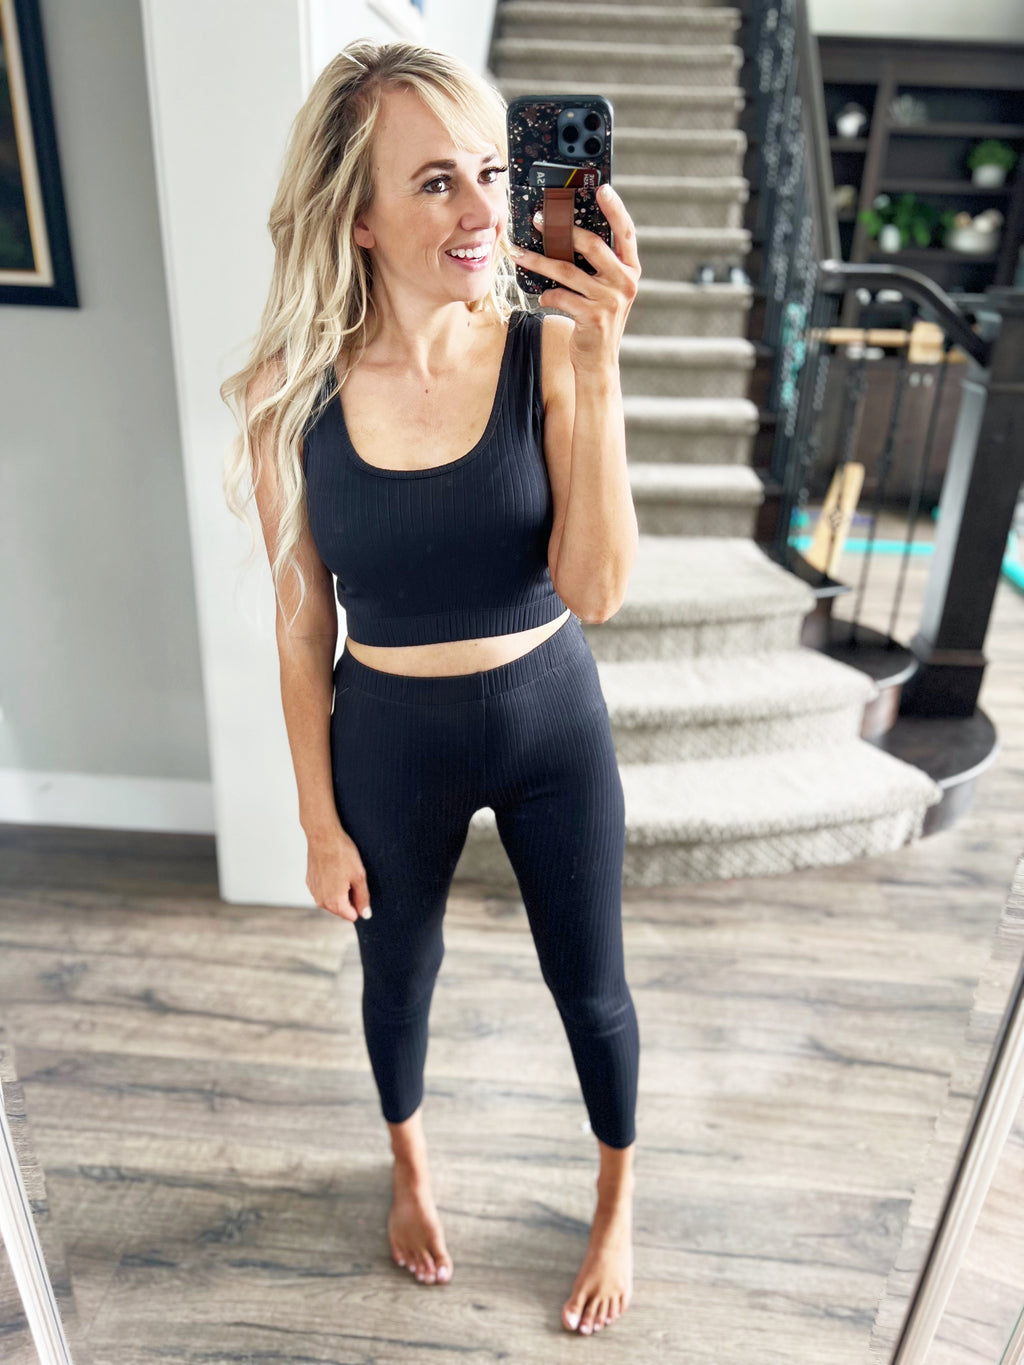 All Over The Place Ribbed 3 Piece Leggings Set in Black